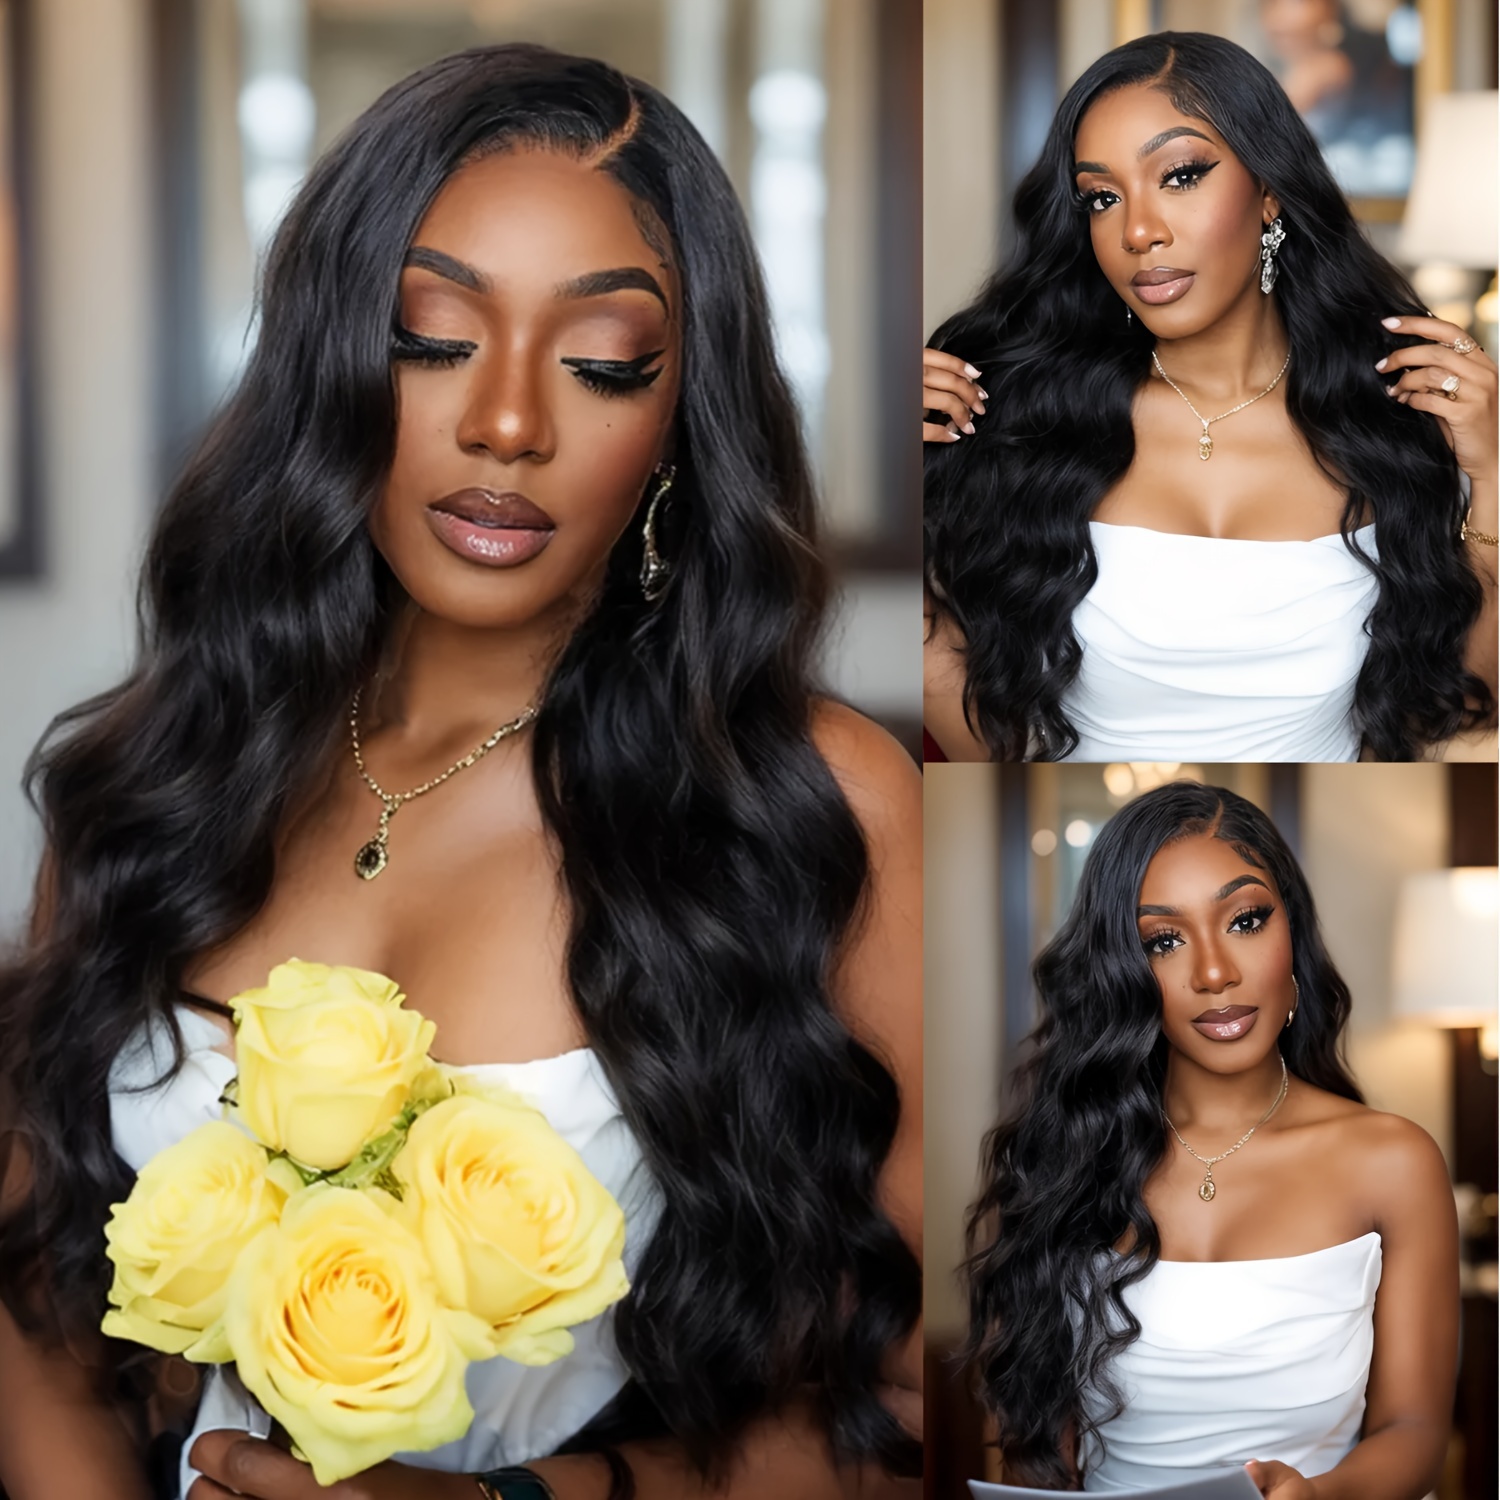  UNice Hair Body Wave U Part Wig Human Hair for Women 12A  Brazilian Hair Wear and Go Glueless Human Hair Wig Wavy Upart Wig Beginner  Friendly 180% Density Natural Color